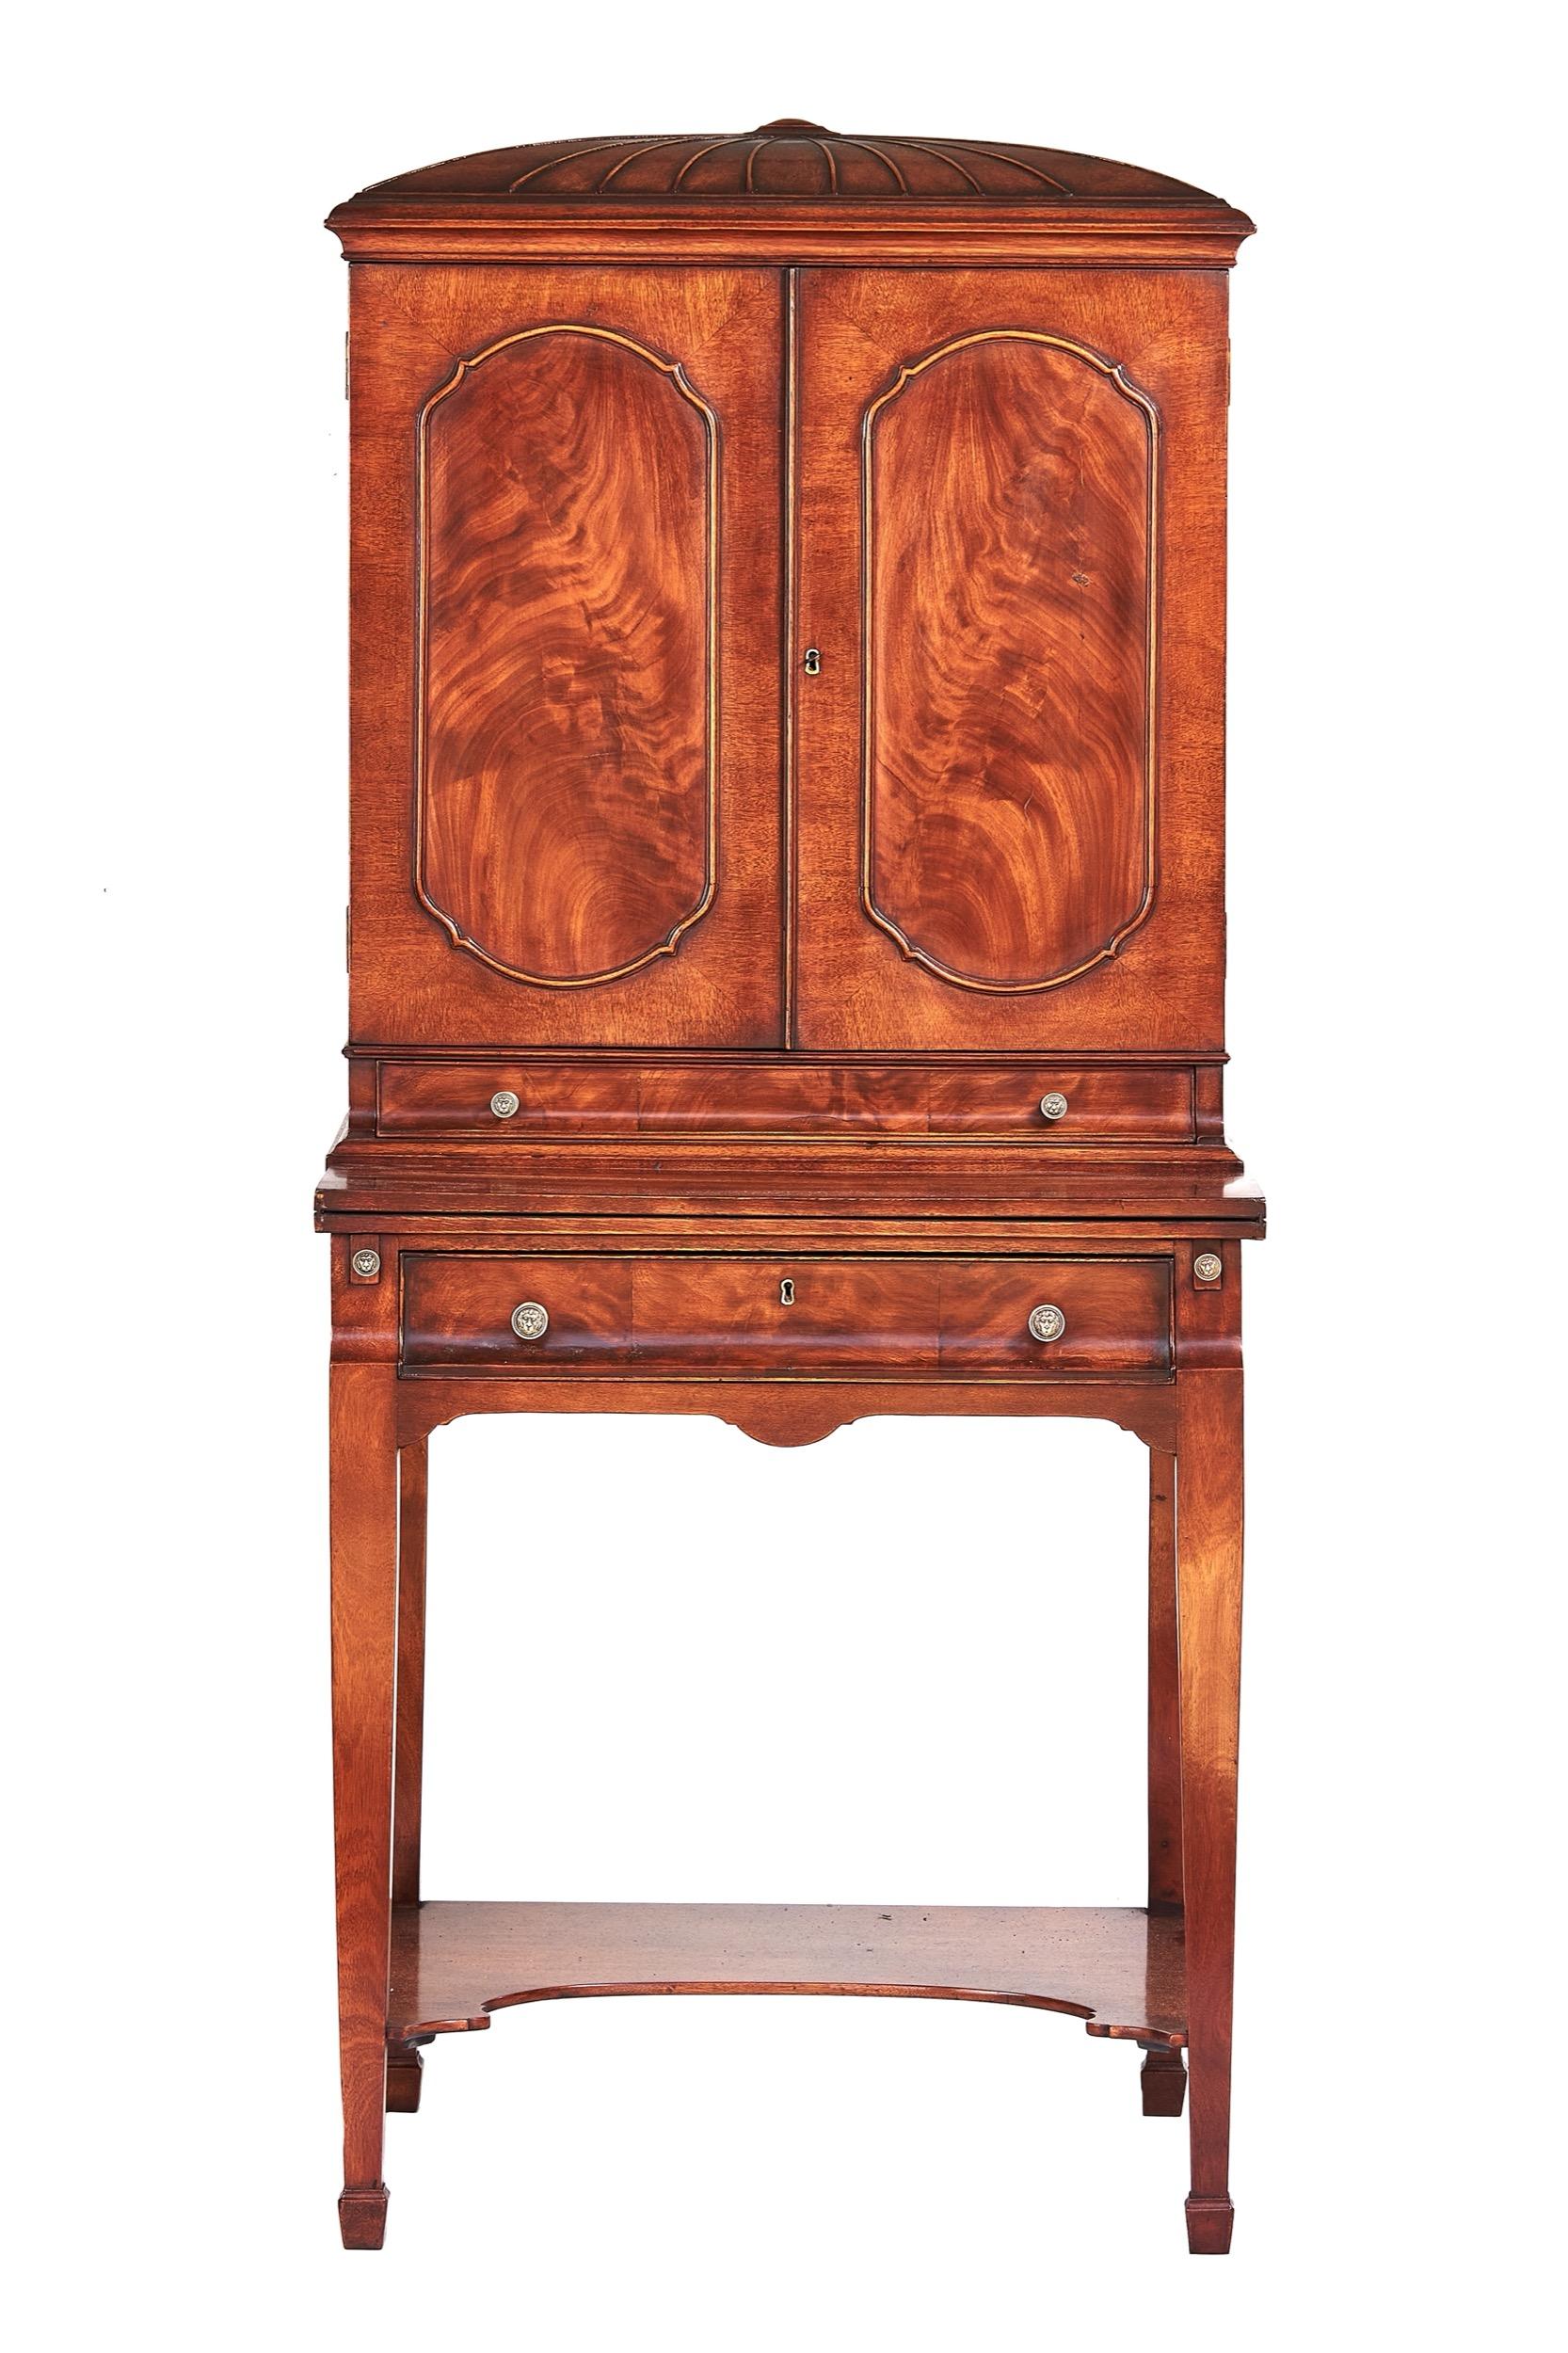 Fine Regency Style  Mahogany Writing Cabinet circa 1900
Semi dome shaped top with mould detail. 
Top Section :
Pair Flamed Mahogany doors, with oval framed panels, 
Working Lock & Key, open to Reveal:
Shelf, open pigeon holes, Centre door